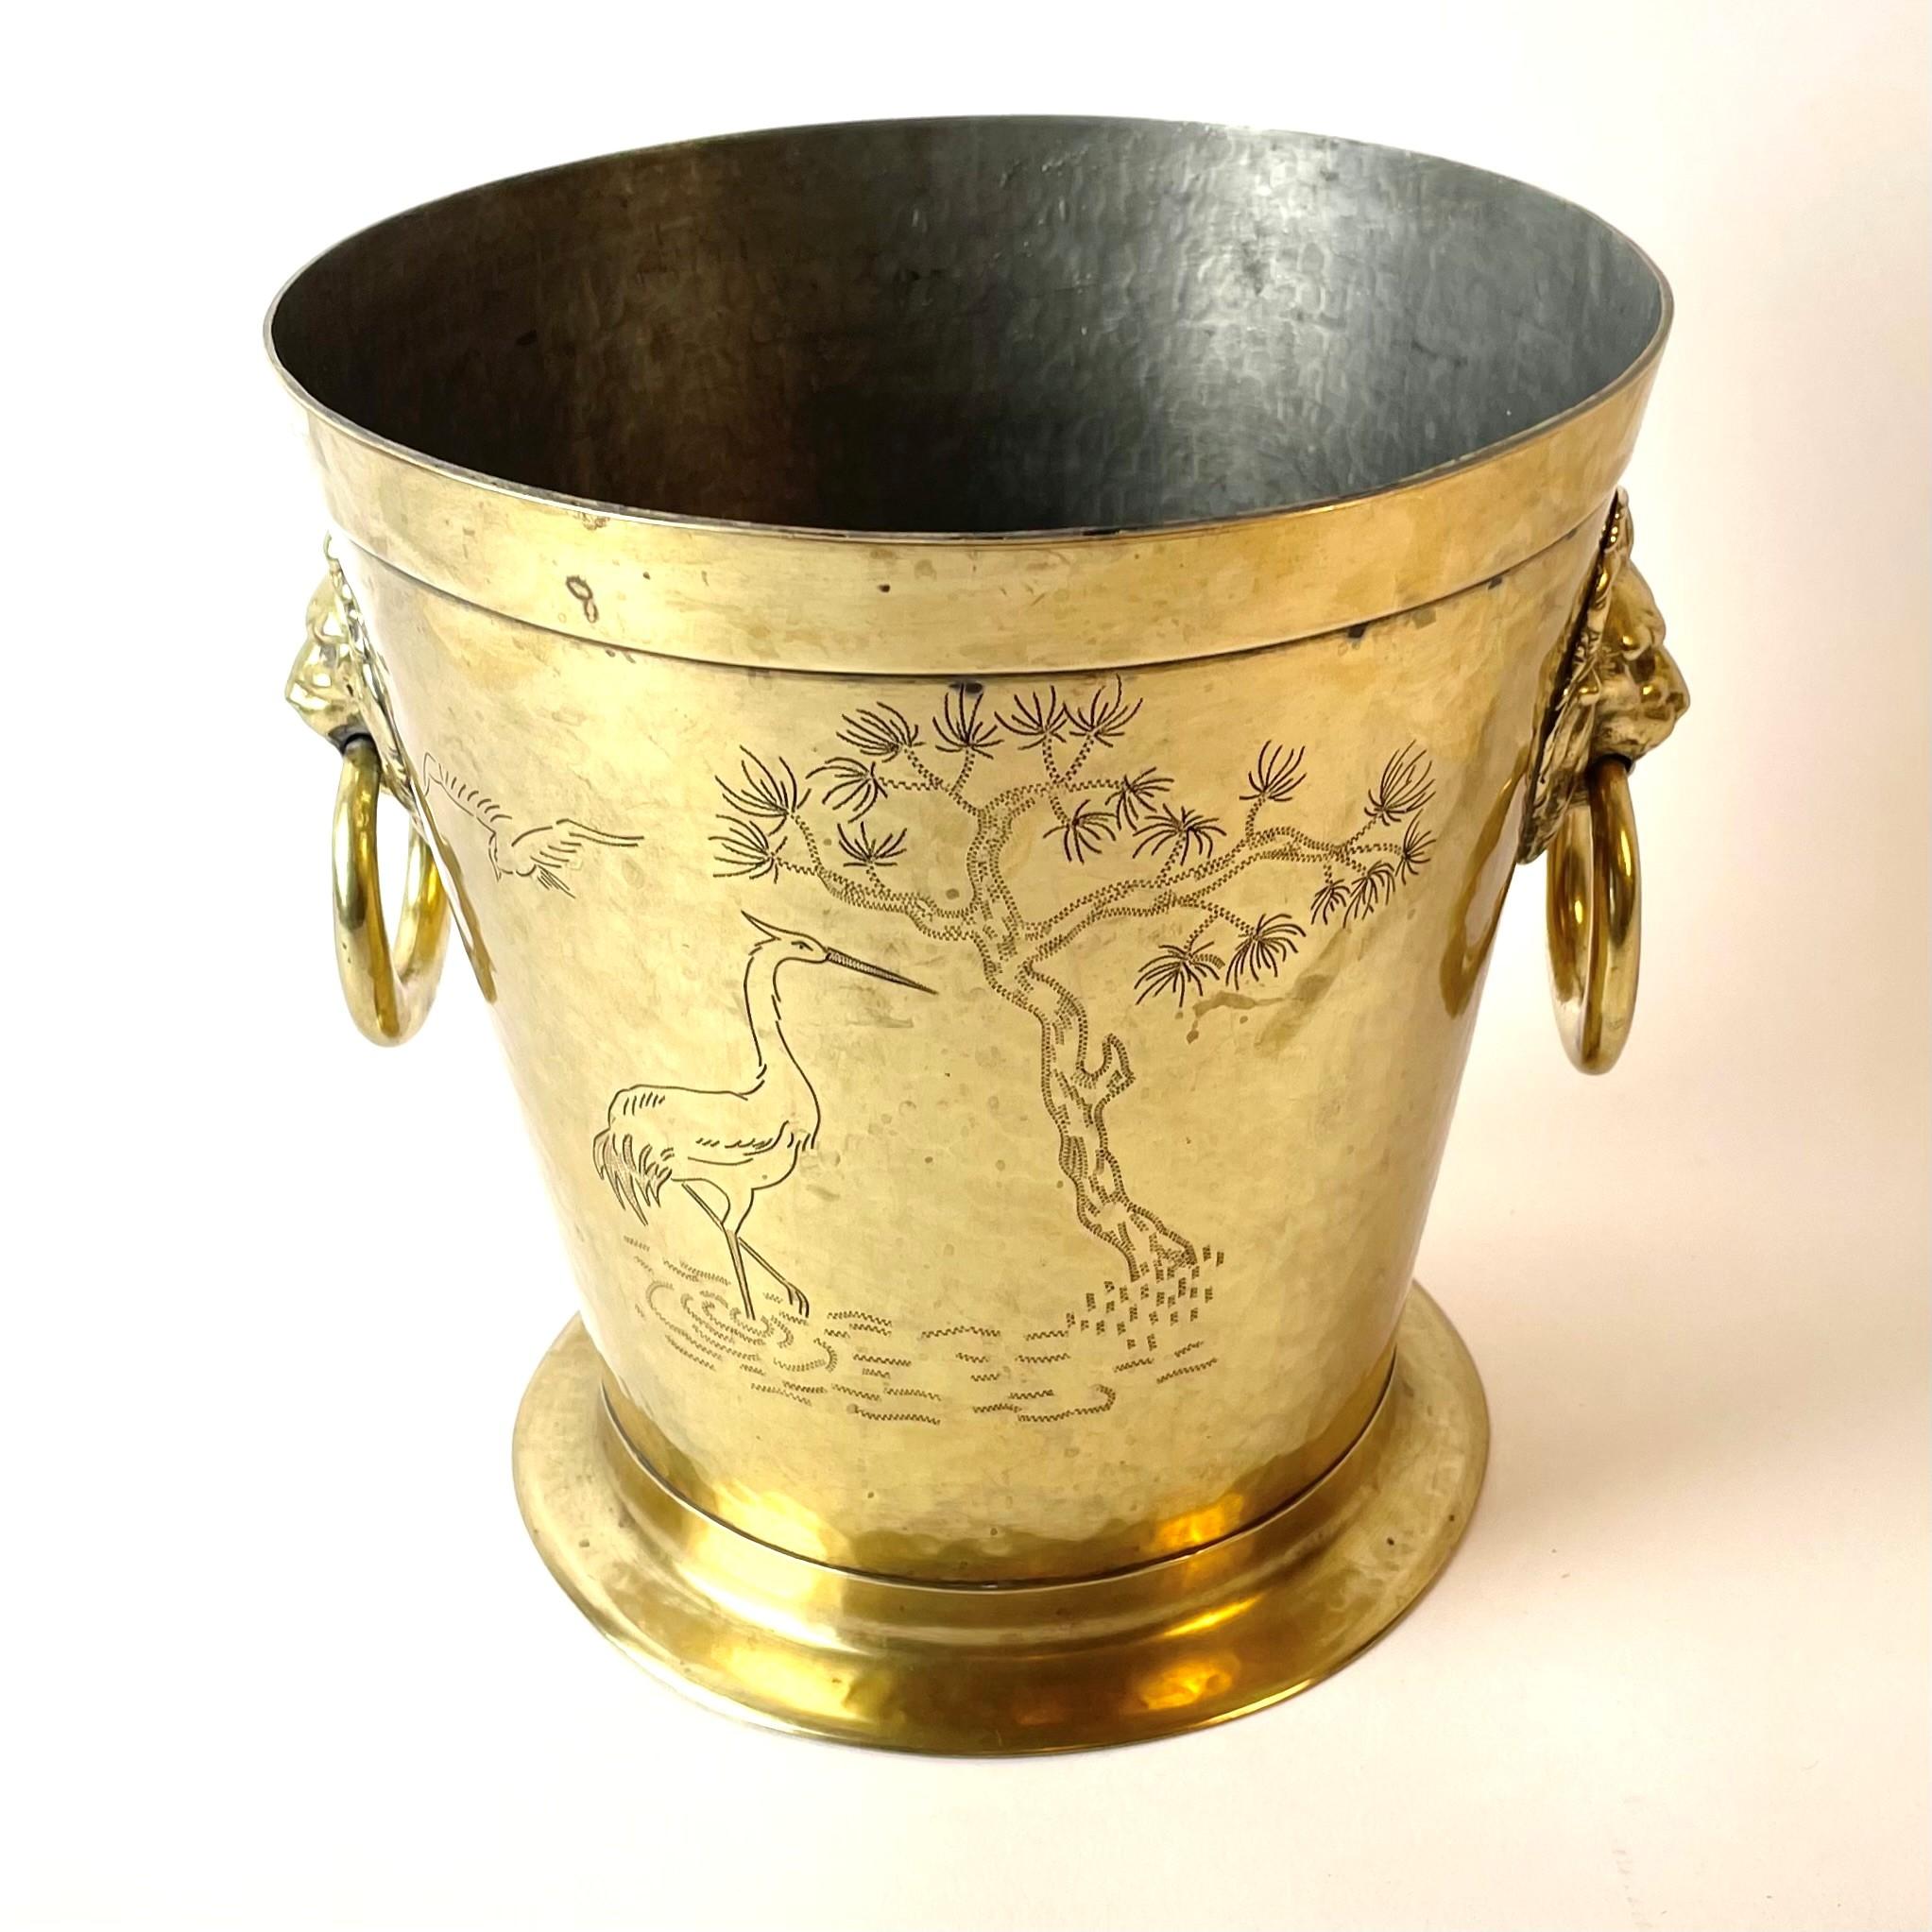 Beautiful wine cooler in brass, Japonaiserie, from early 20th century by Richard Ringström, Hälsingborg, Sweden. Tinned inside.

Wear consistent with age and use.